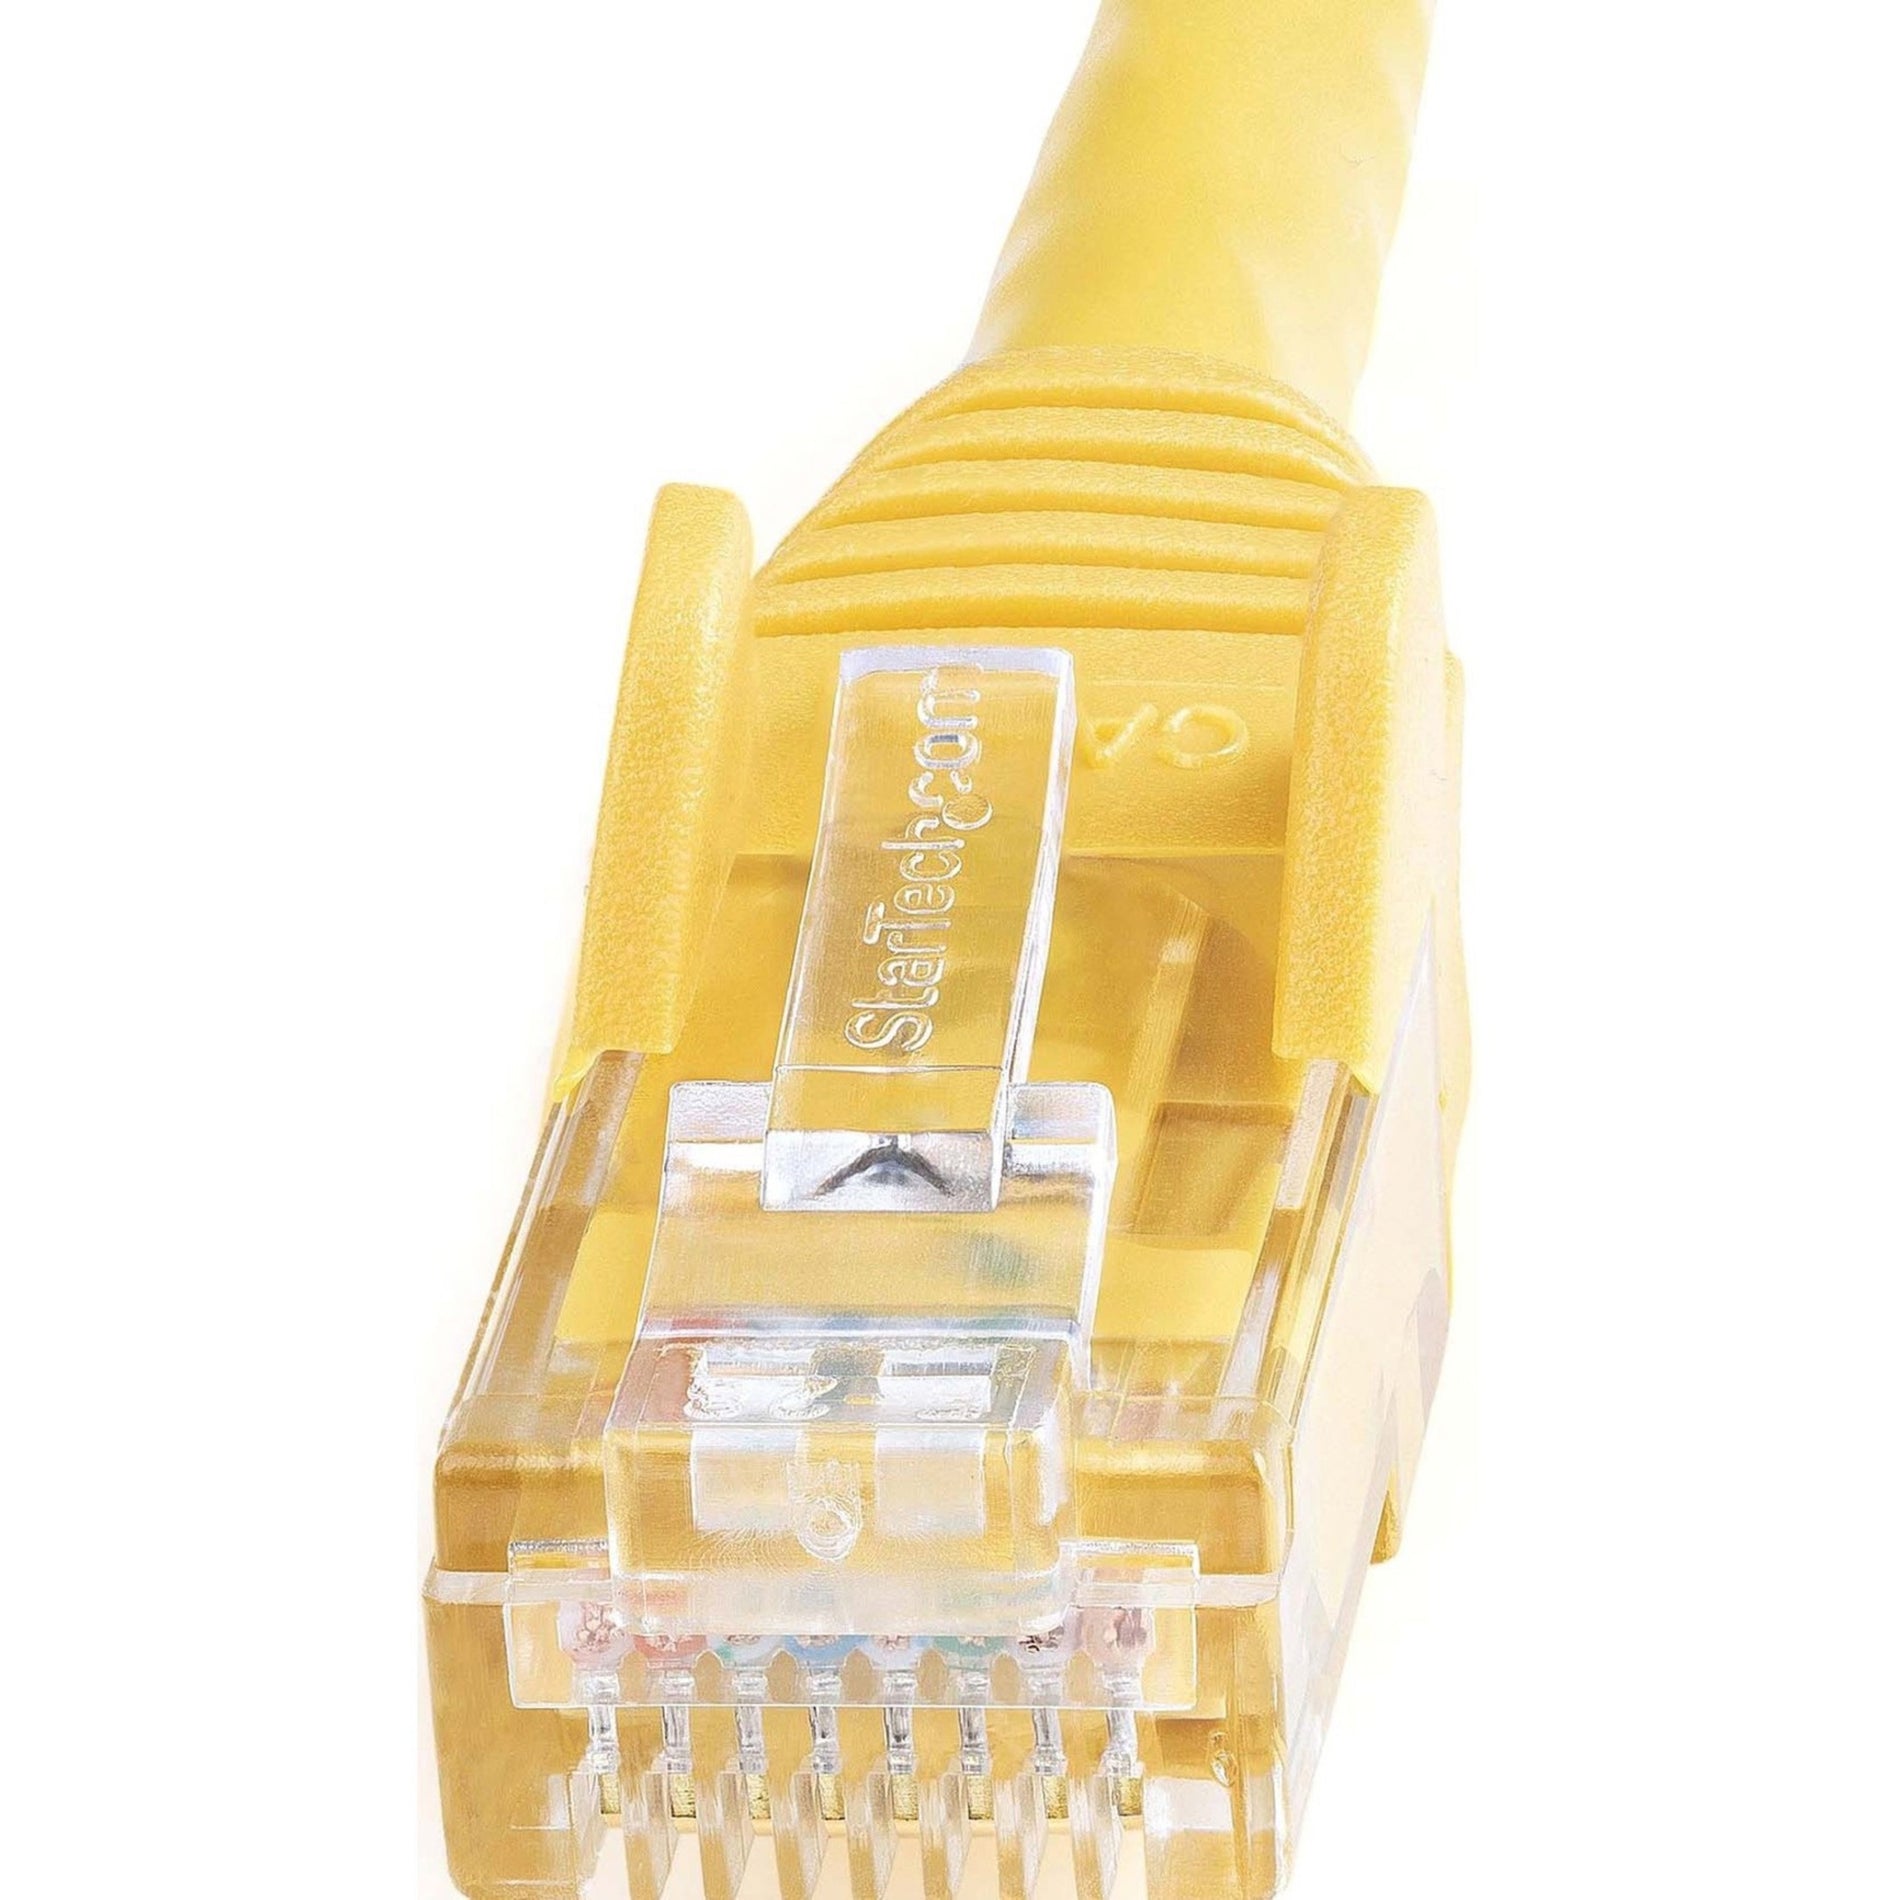 StarTech.com N6PATCH3YL 3 ft Yellow Snagless Cat6 UTP Patch Cable, Lifetime Warranty, 10 Gbit/s Data Transfer Rate, Rust Resistant